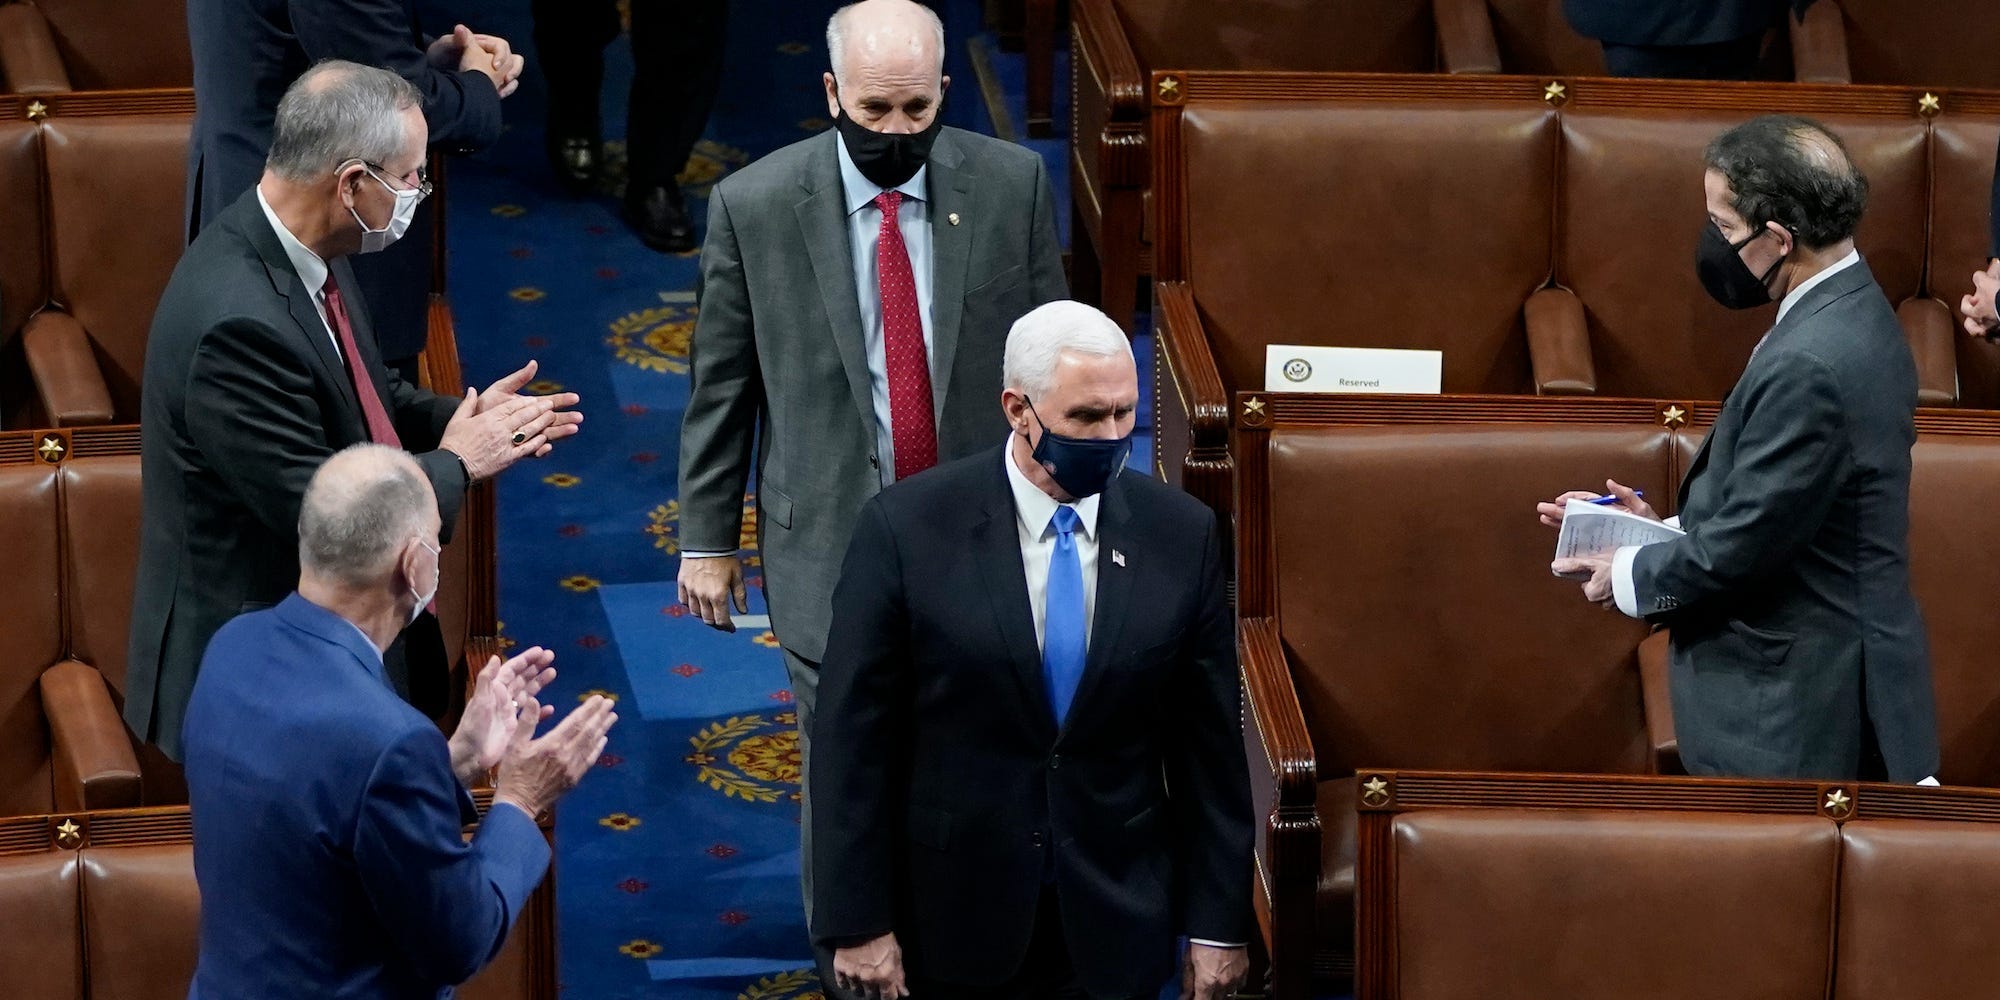 : U.S. Vice President Mike Pence walks into the House Chamber during a reconvening of a joint session of Congress on January 06, 2021 in Washington, DC. Members of Congress returned to the House Chamber after being evacuated when protesters stormed the Capitol and disrupted a joint session to ratify President-elect Joe Biden's 306-232 Electoral College win over President Donald Trump.